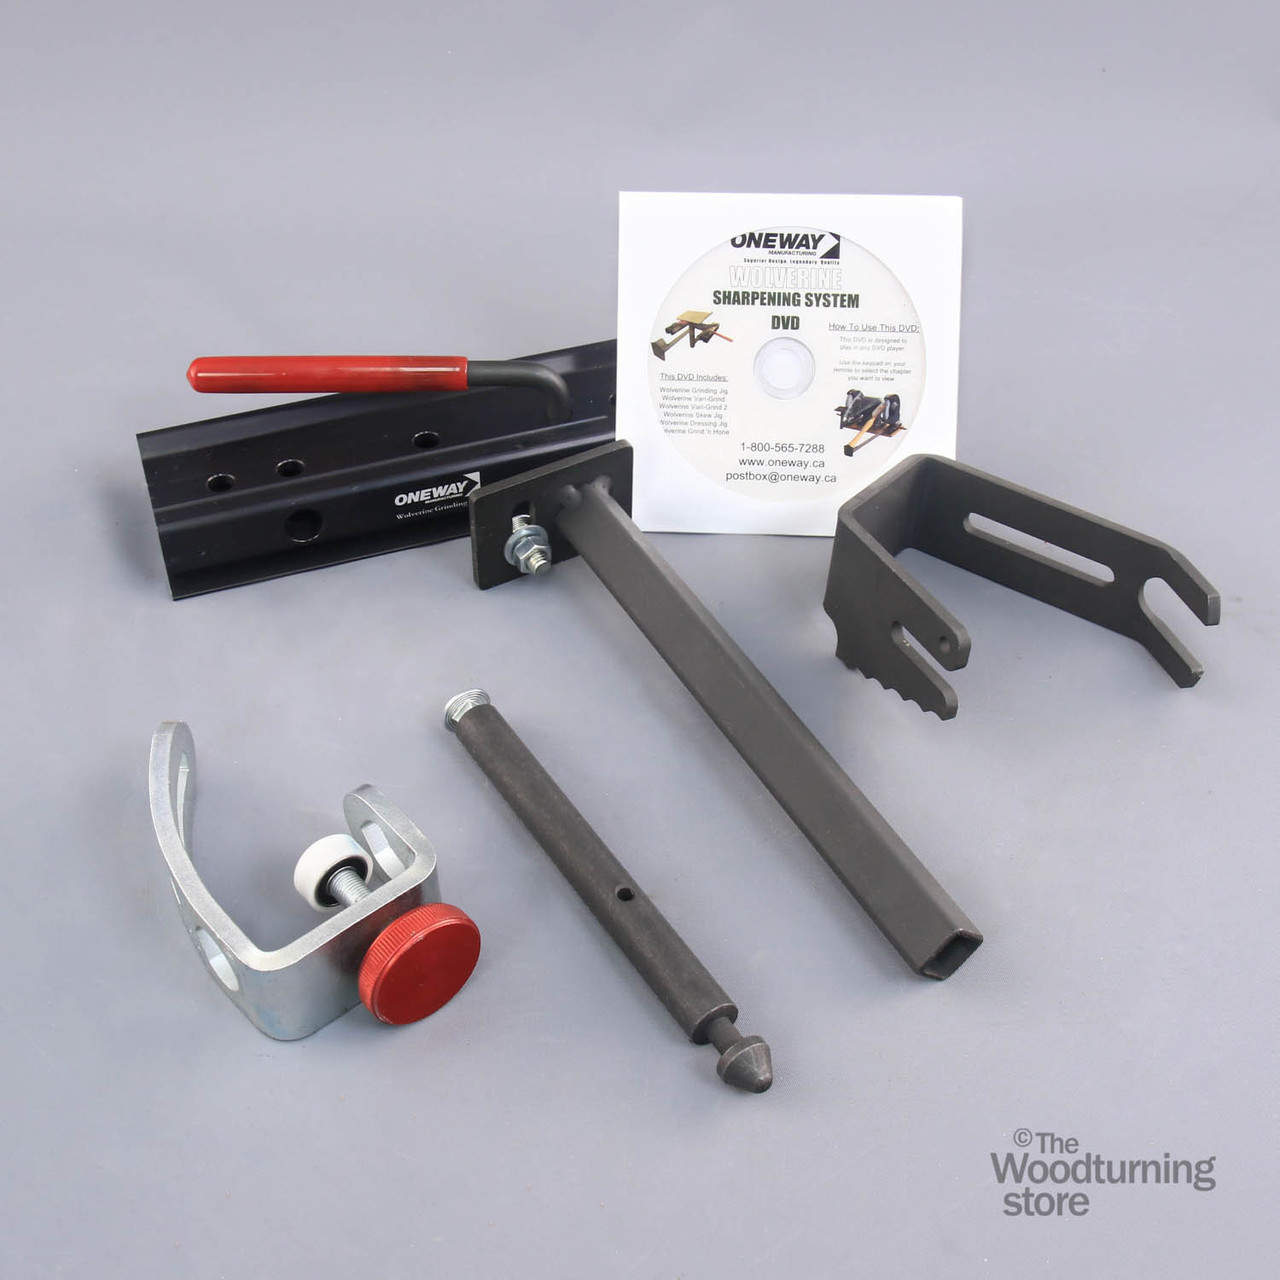 Oneway Vari Grind 2 Attachment For The Wolverine Grinding Jig With Base The Woodturning Store